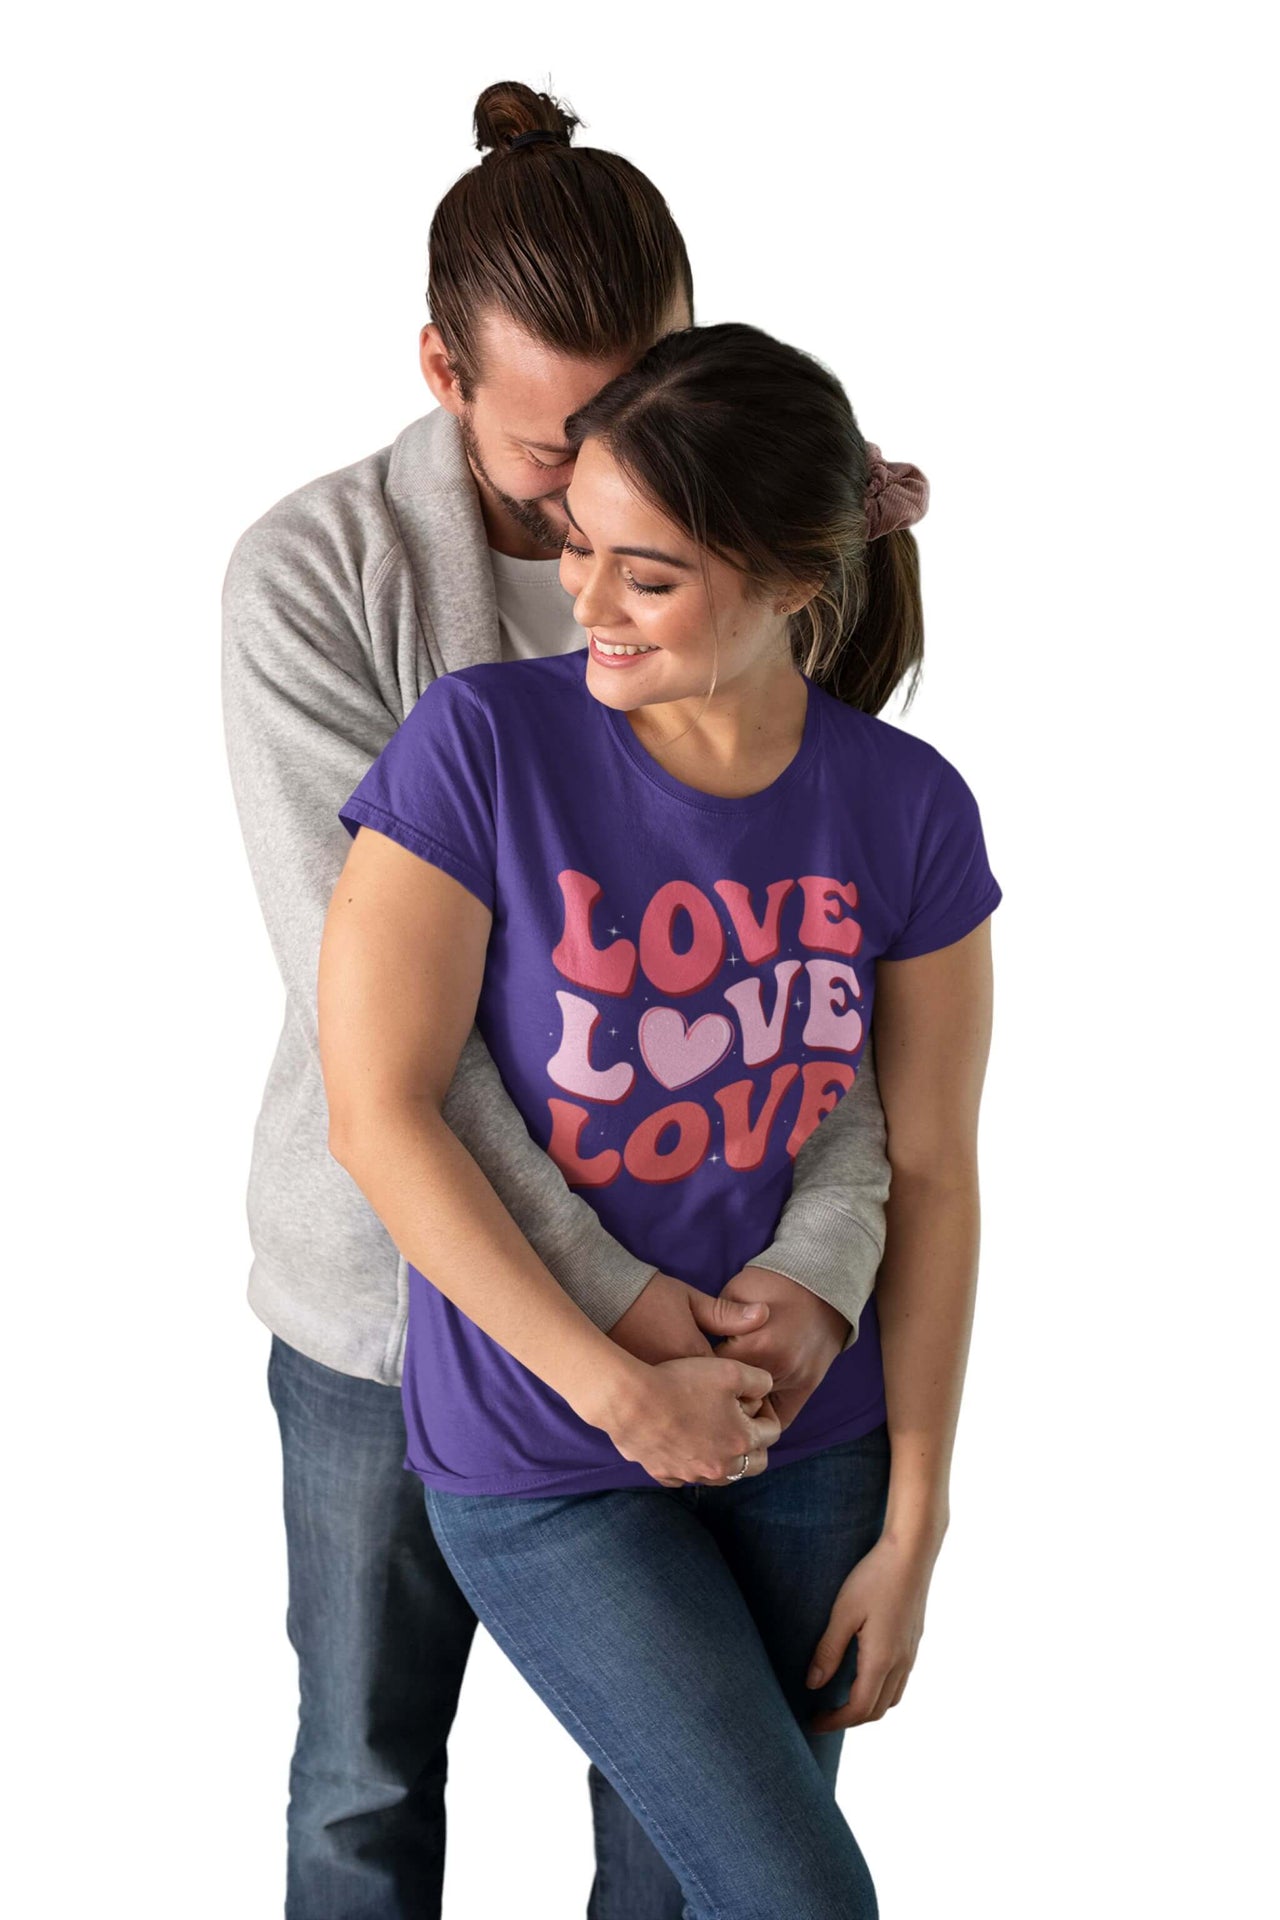 Three Times The Love With A Heart - Women's Boyfriend Tee - Valentines Day Gift - Meaningful Gift for Her